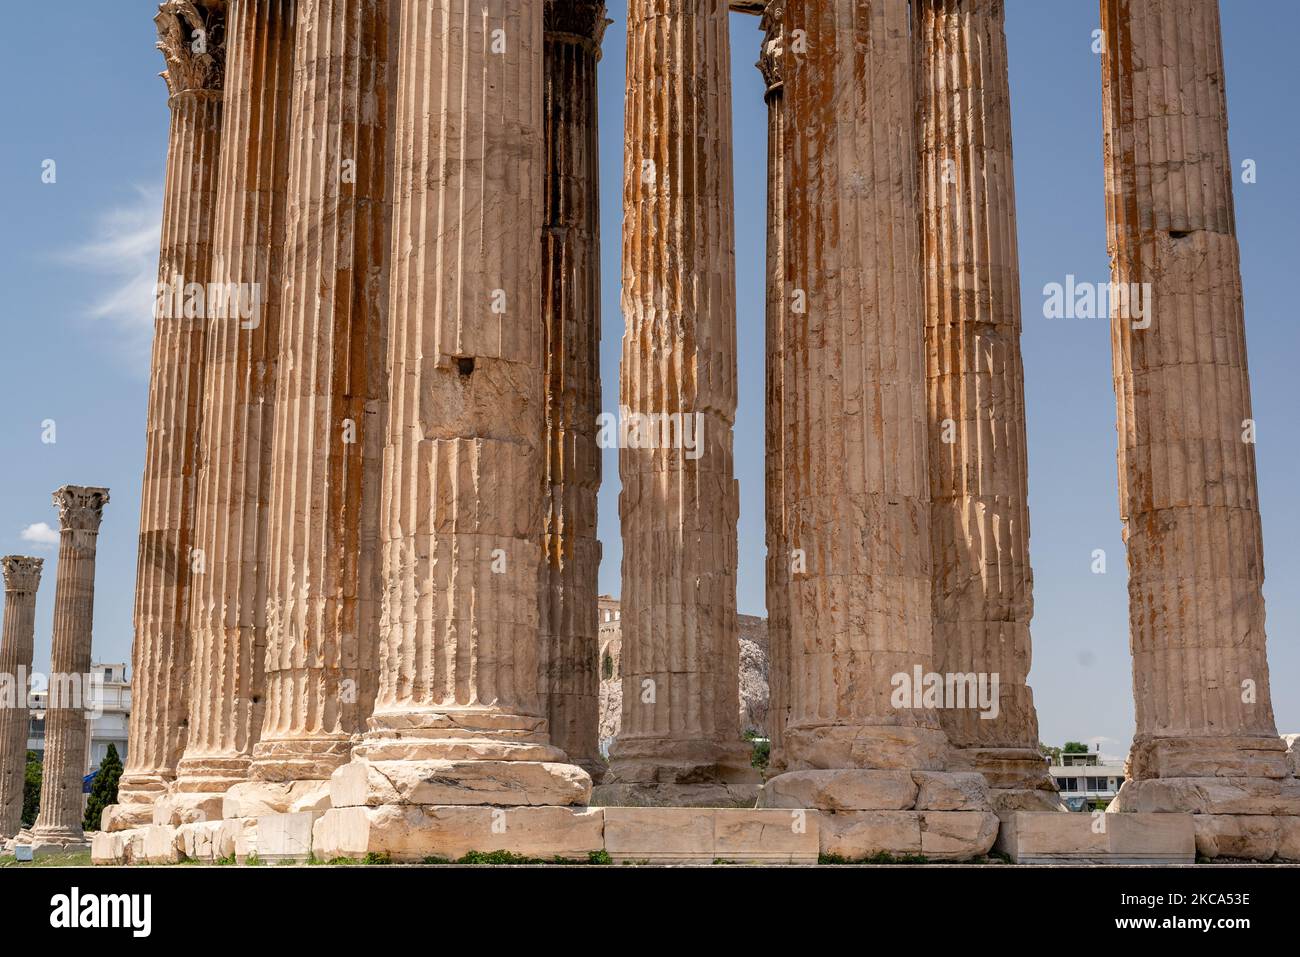 Greece - Day time  photo of the Temple of Zeus in Athens. Stock Photo